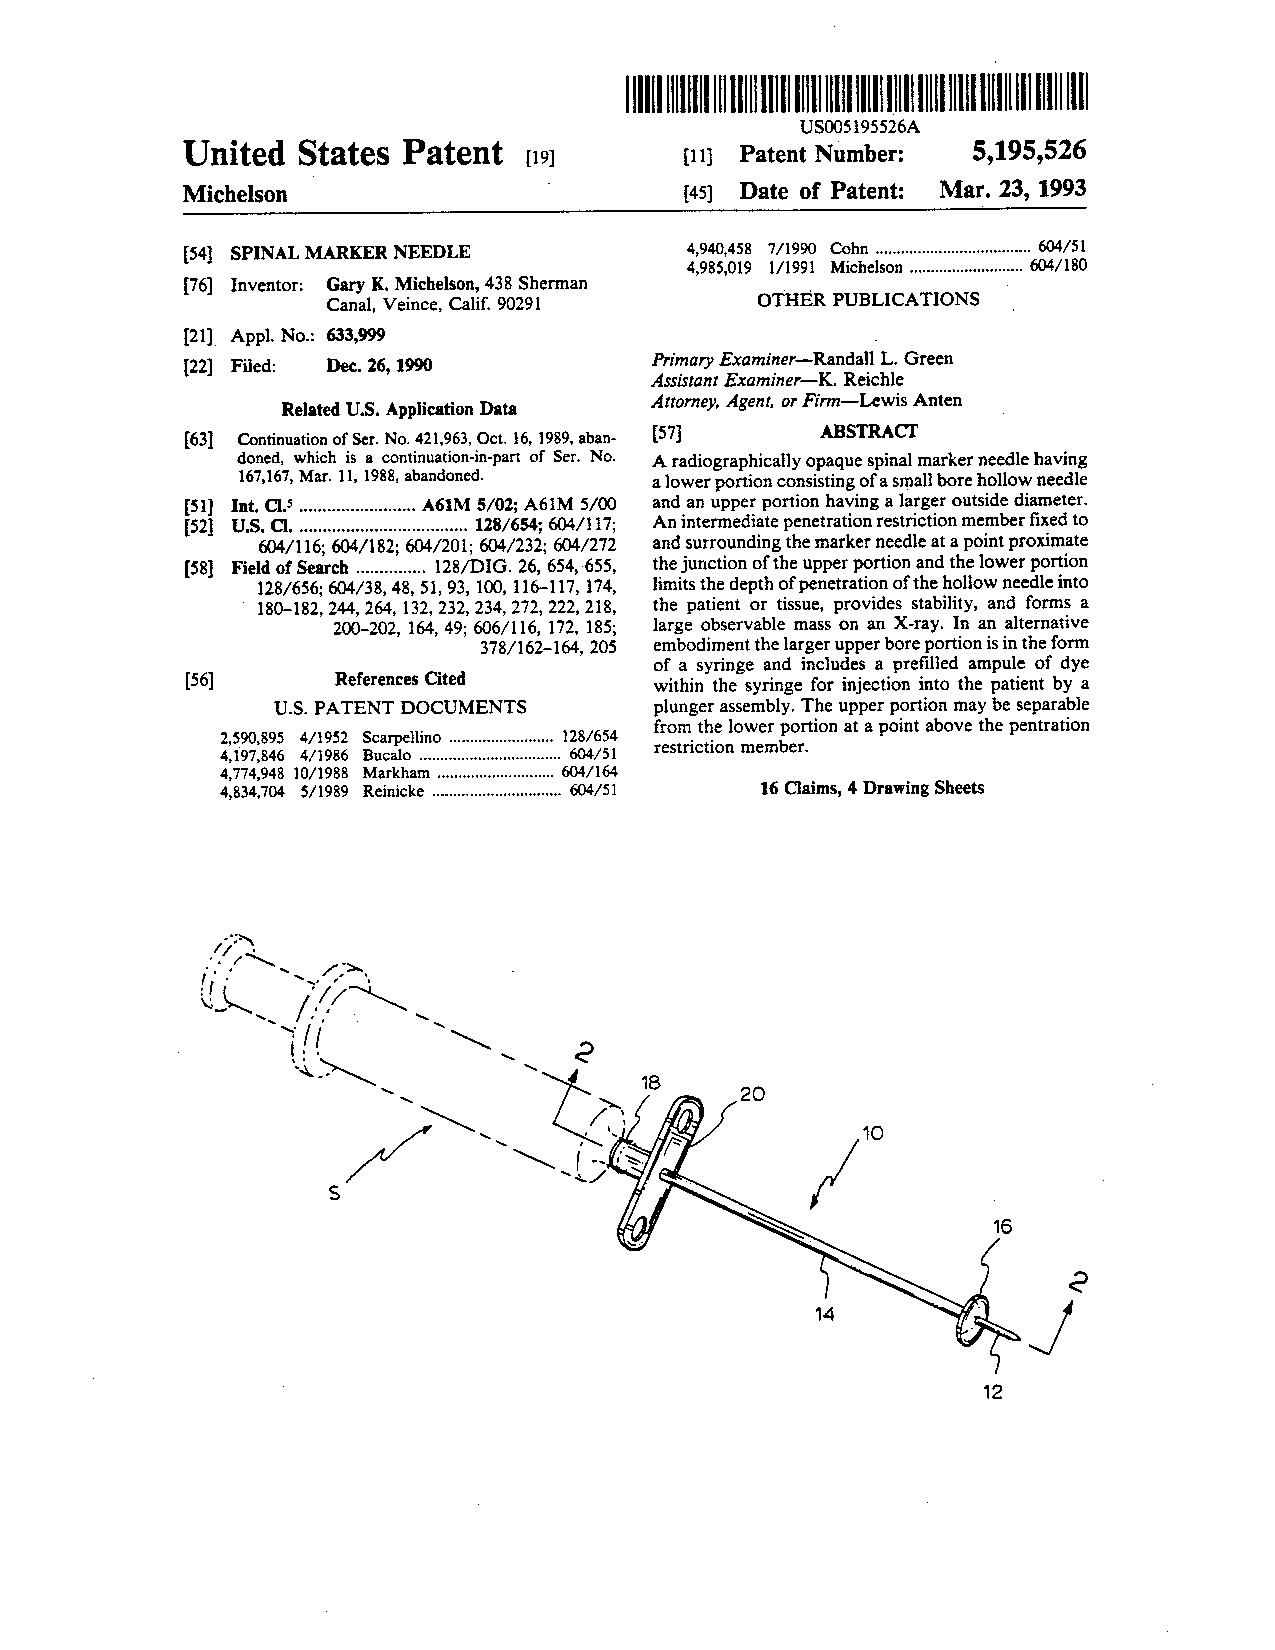 Spinal marker needle - Patent 5,195,526